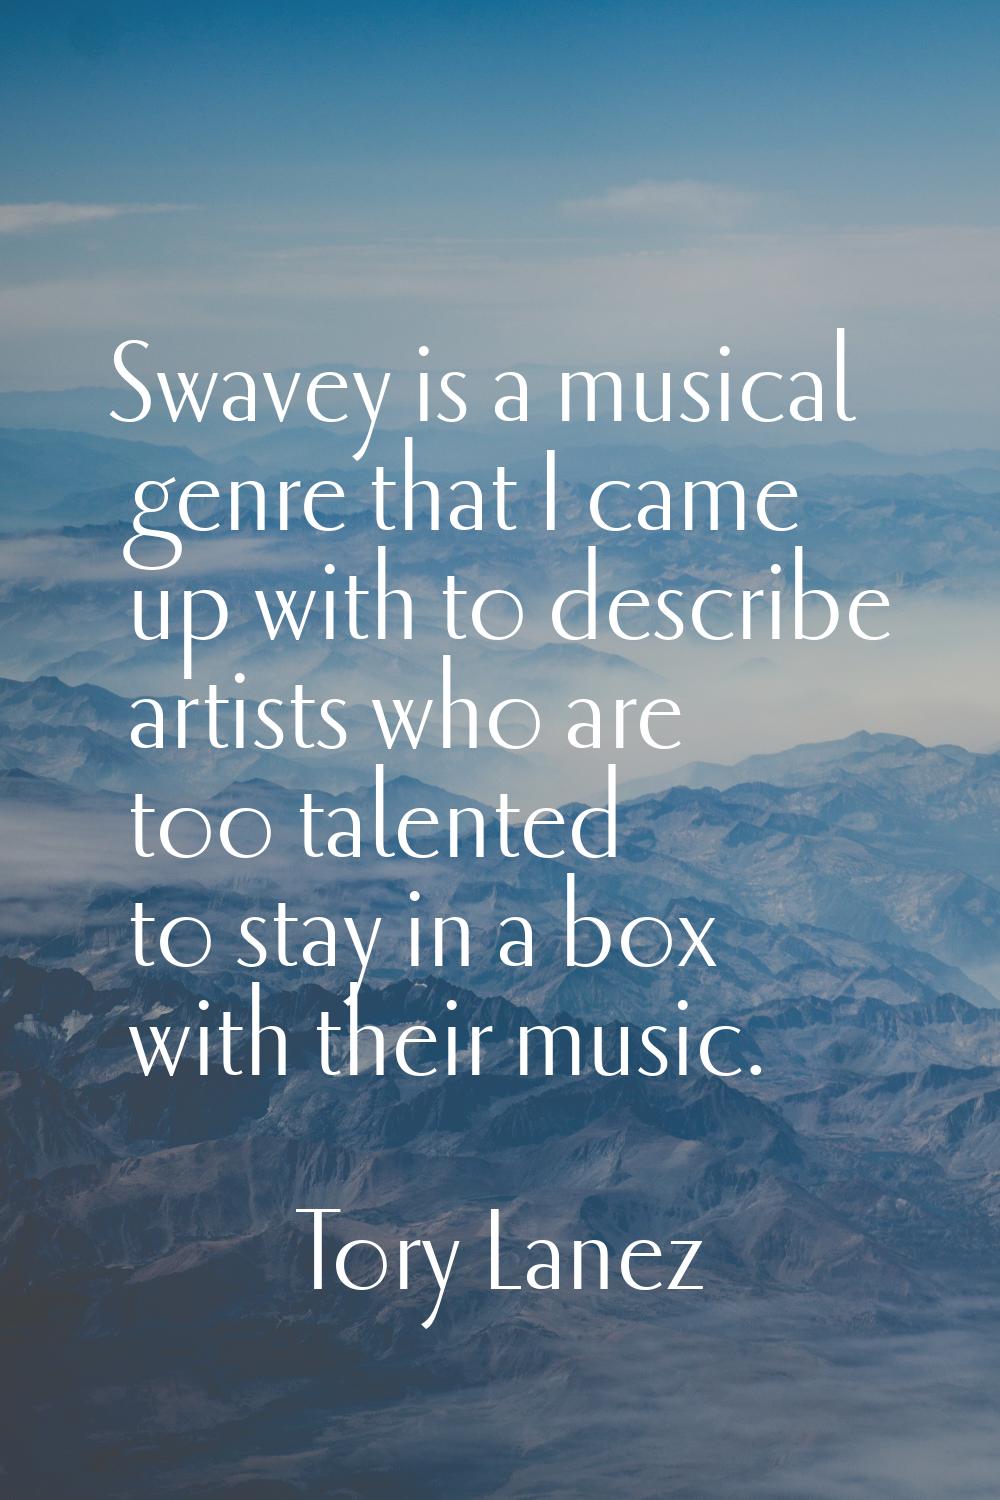 Swavey is a musical genre that I came up with to describe artists who are too talented to stay in a